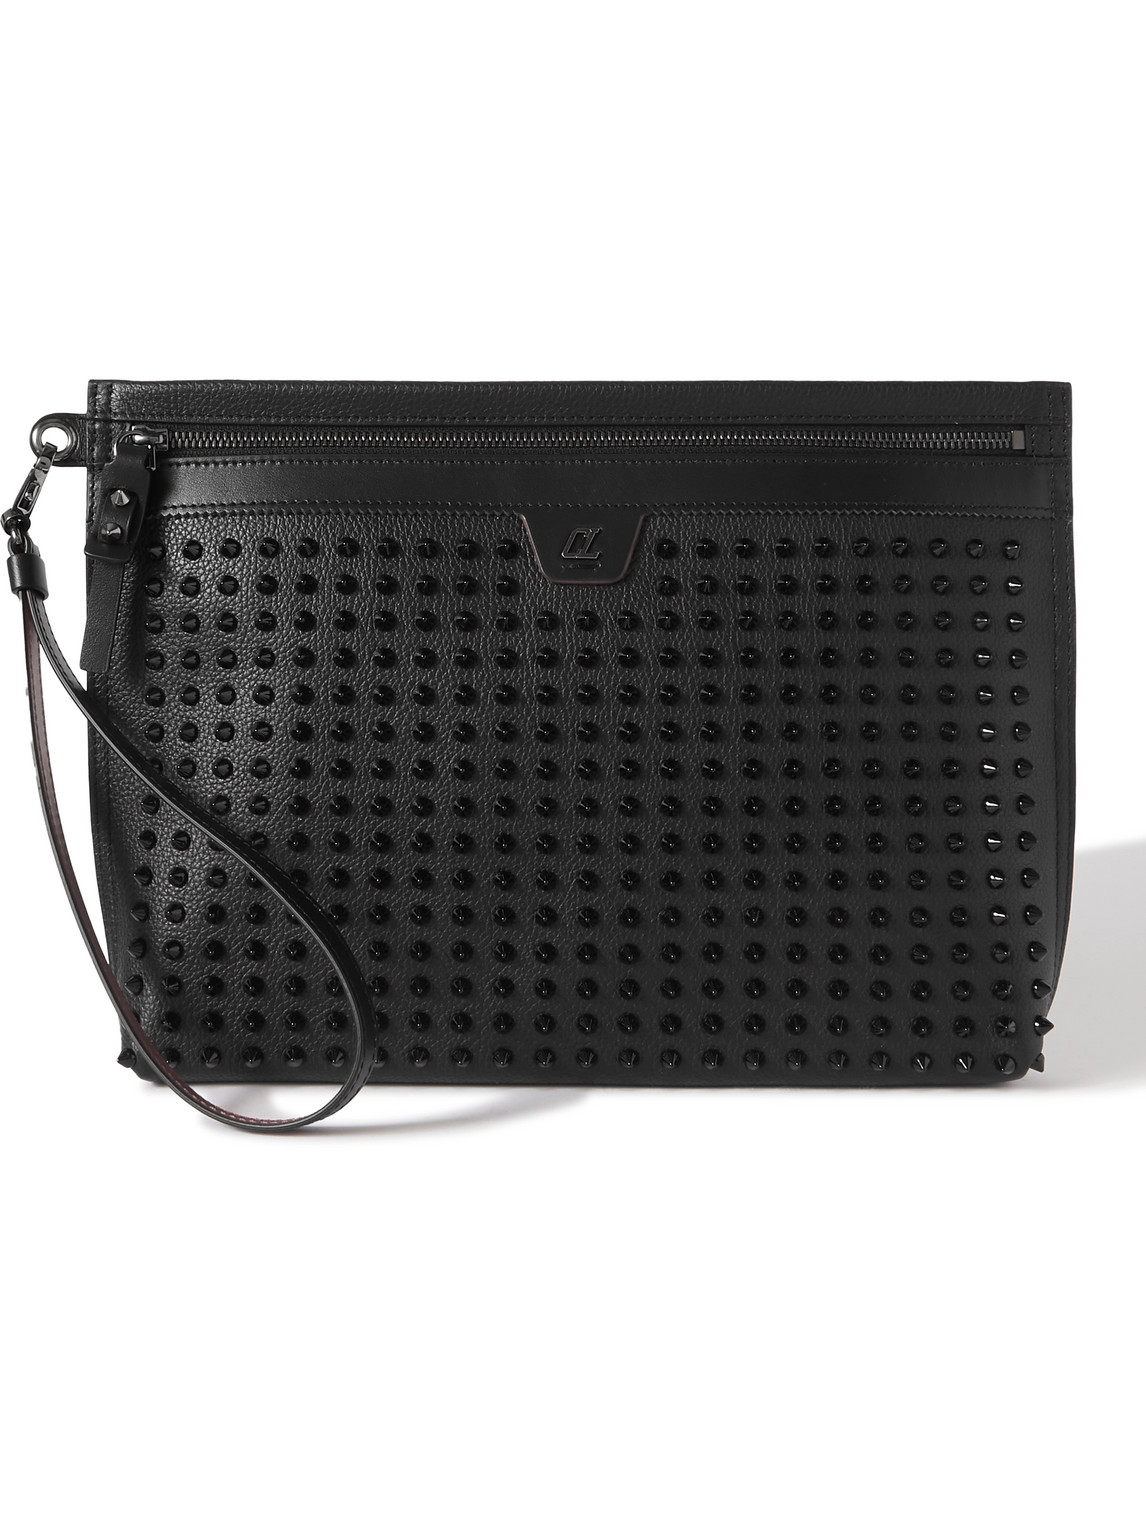 Christian Louboutin City Spiked Full-grain Leather Pouch In Black